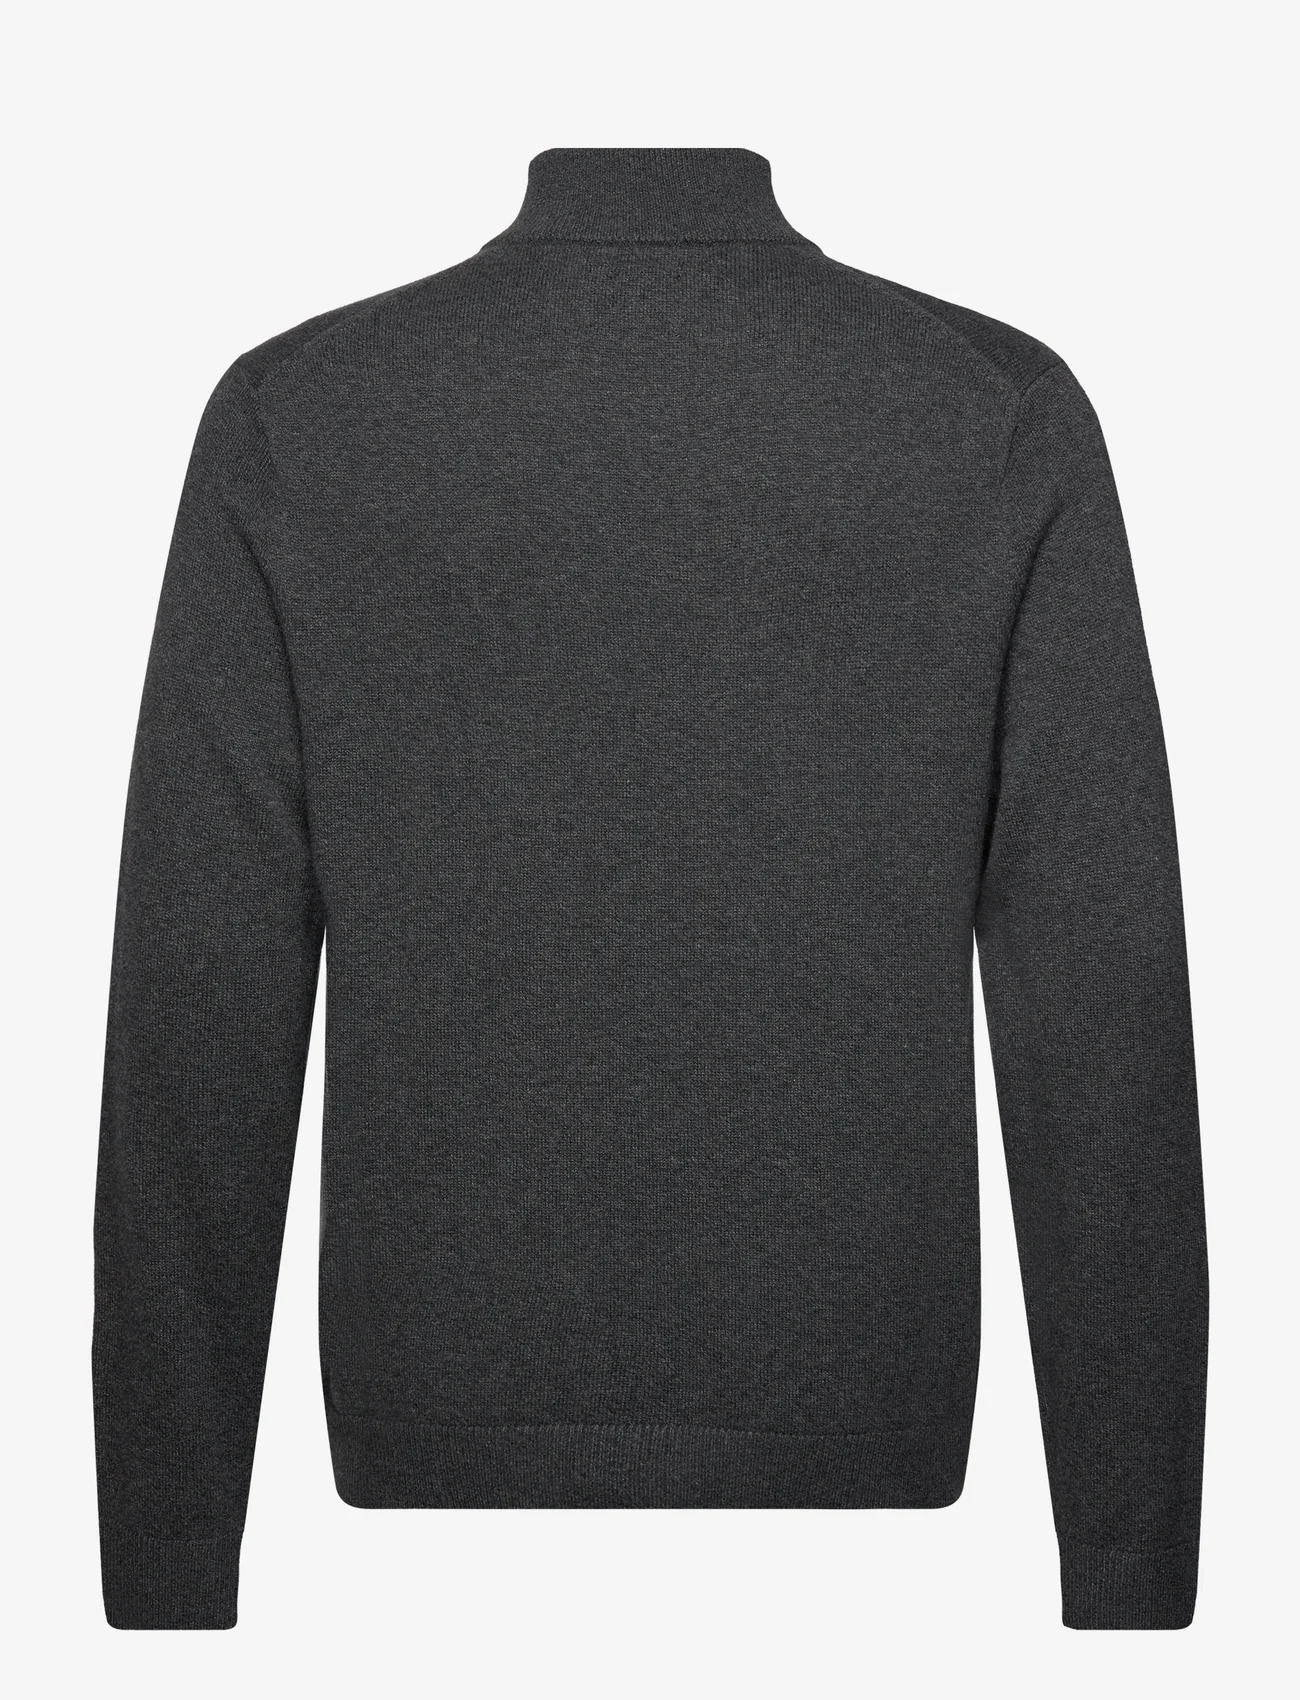 Abercrombie & Fitch - ANF MENS SWEATERS - herren - charcoal marl - 1